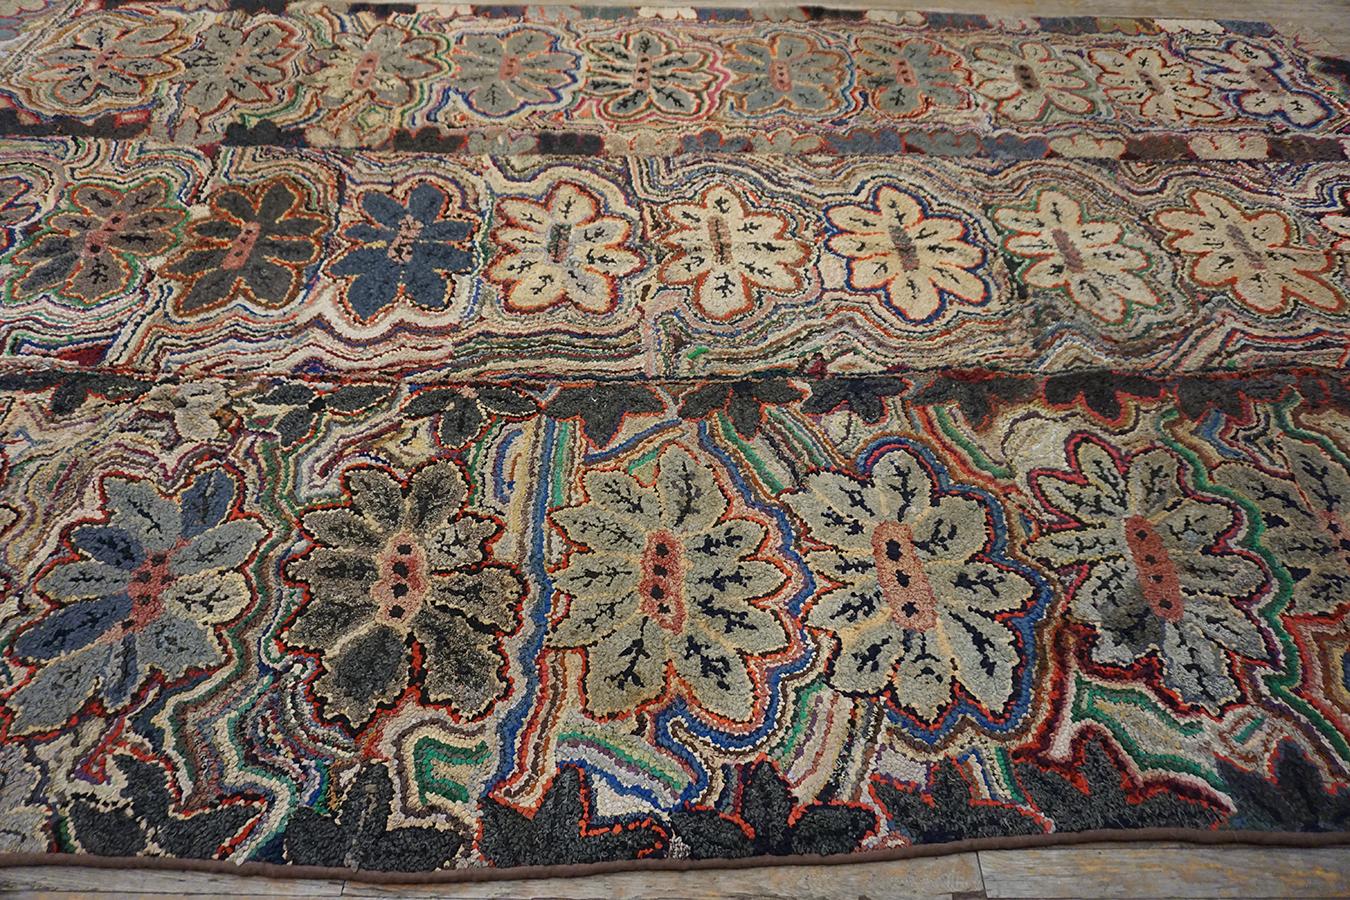 Early 20th Century American Hooked Rug ( 8'4